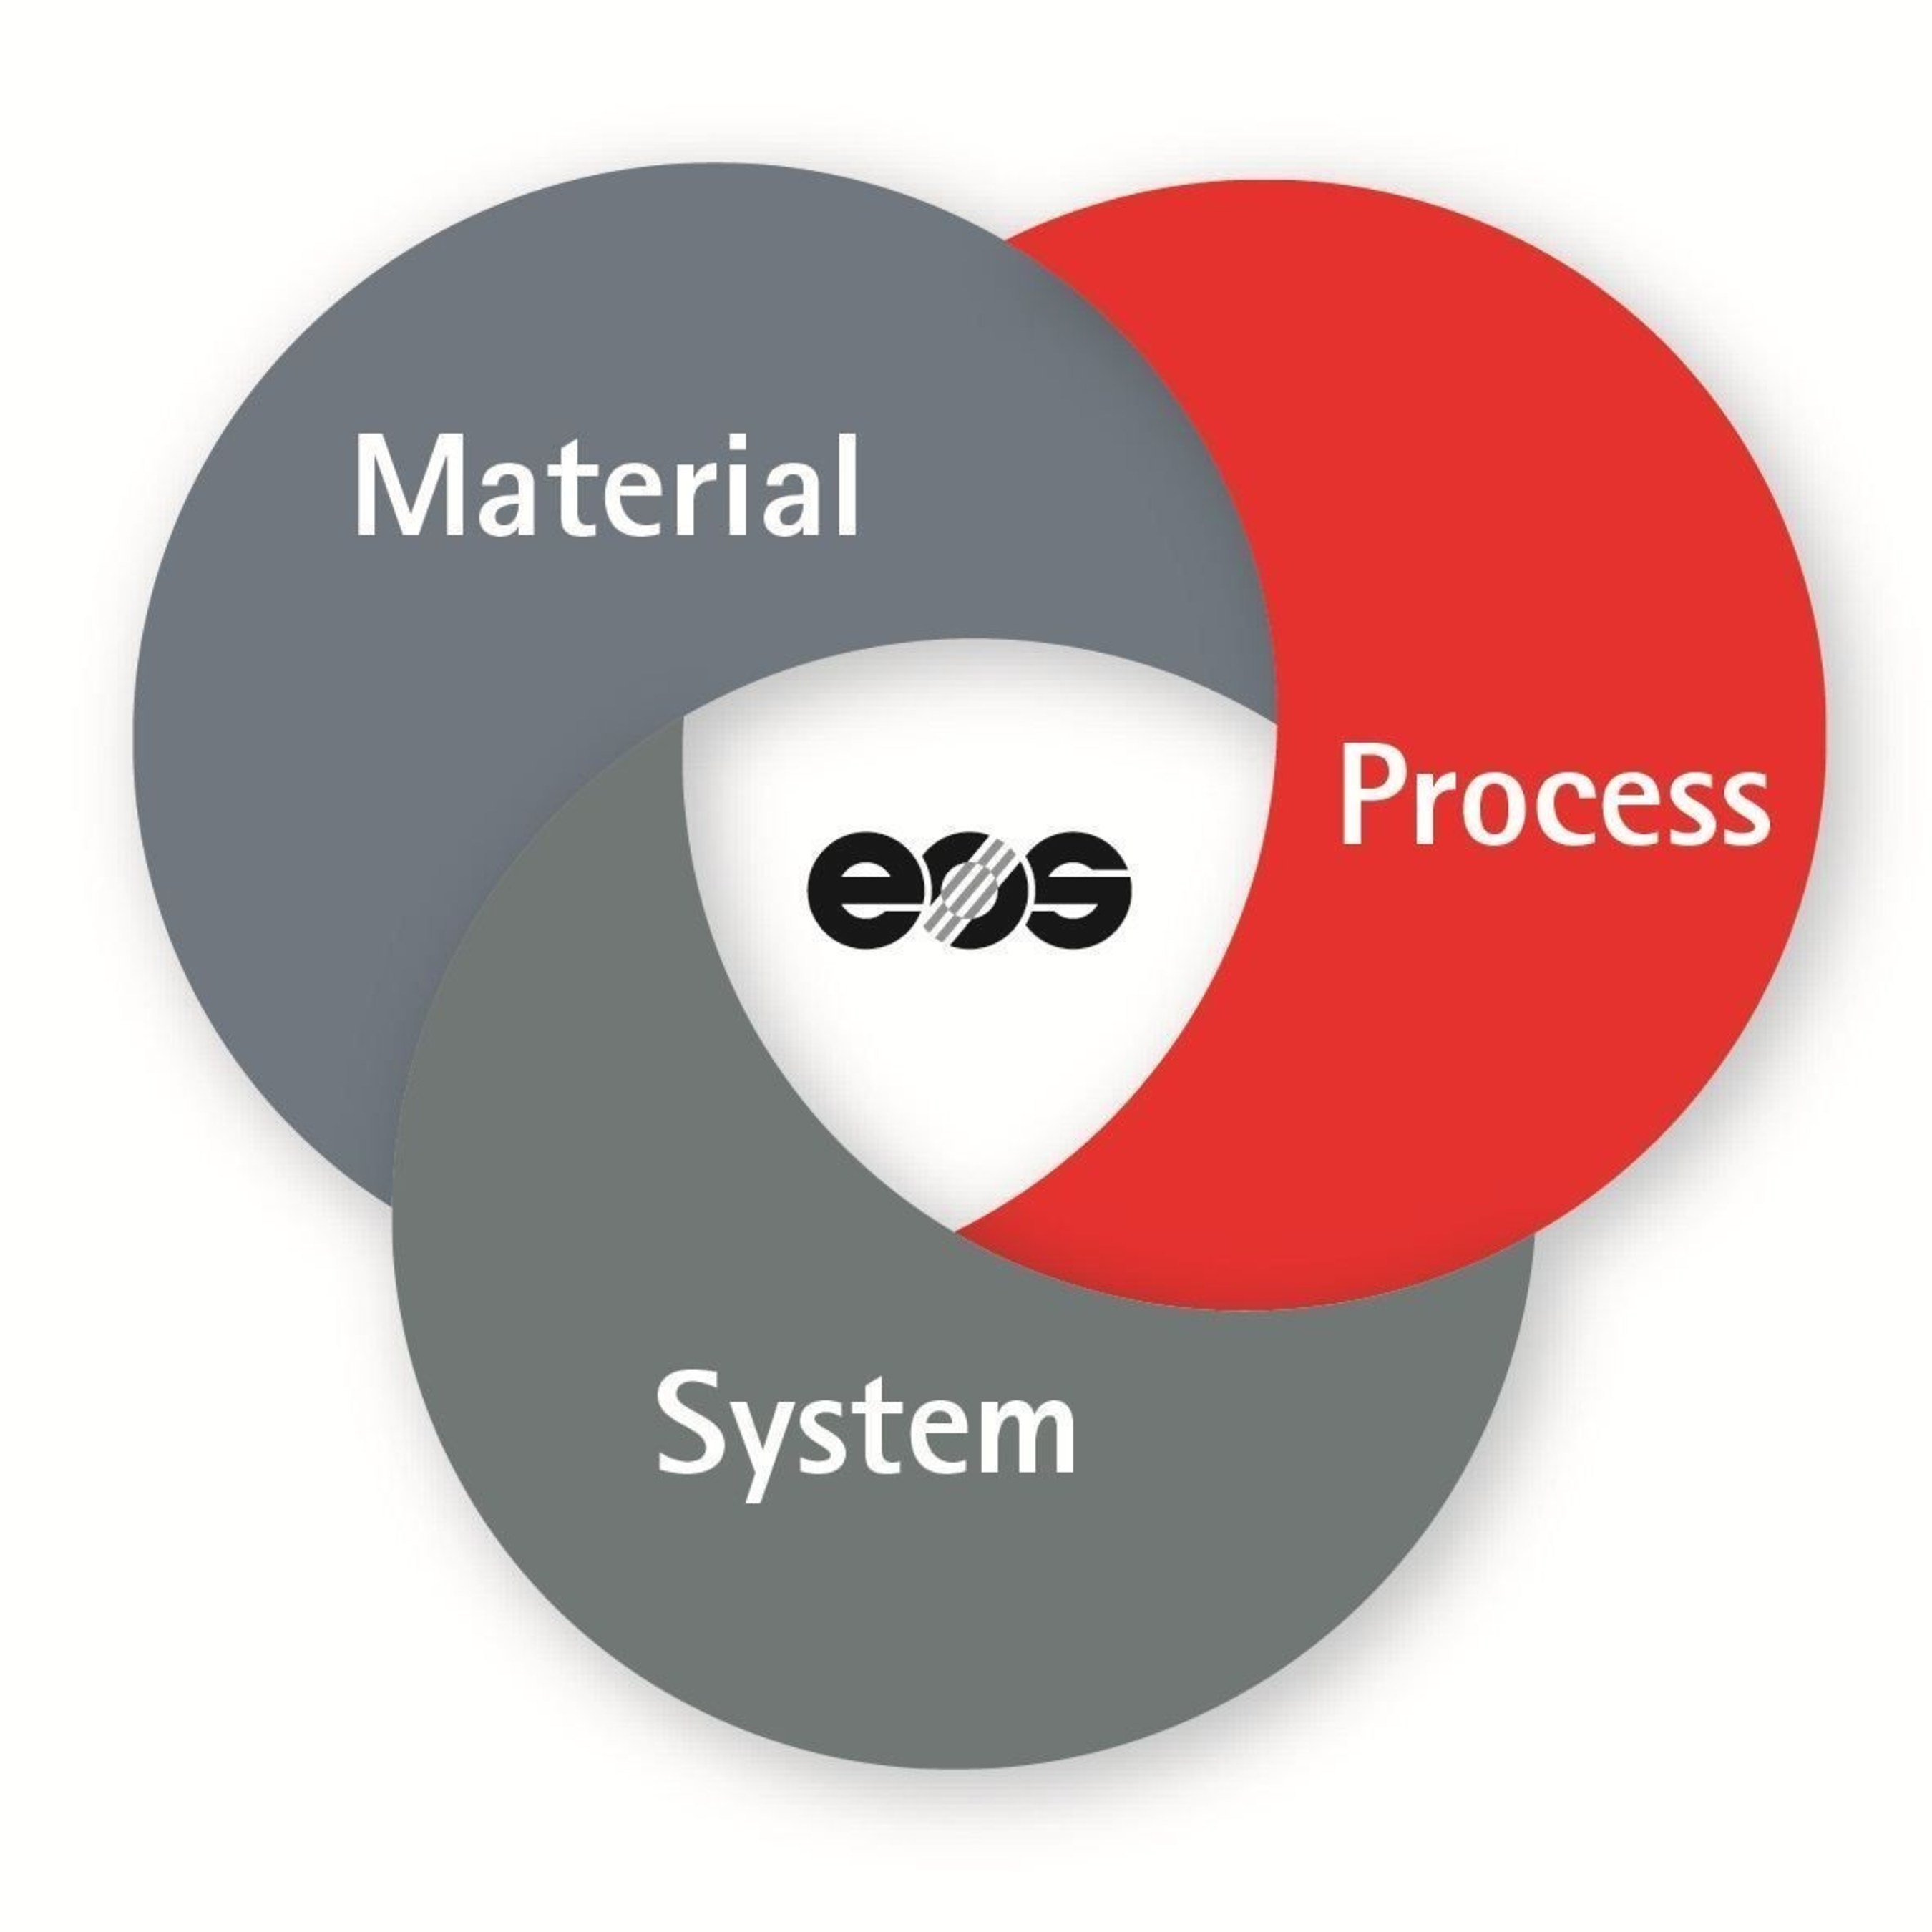 The holistic quality concept at EOS covers the three central technological elements of Additive Manufacturing: system, process, material (source: EOS) (PRNewsFoto/EOS India)